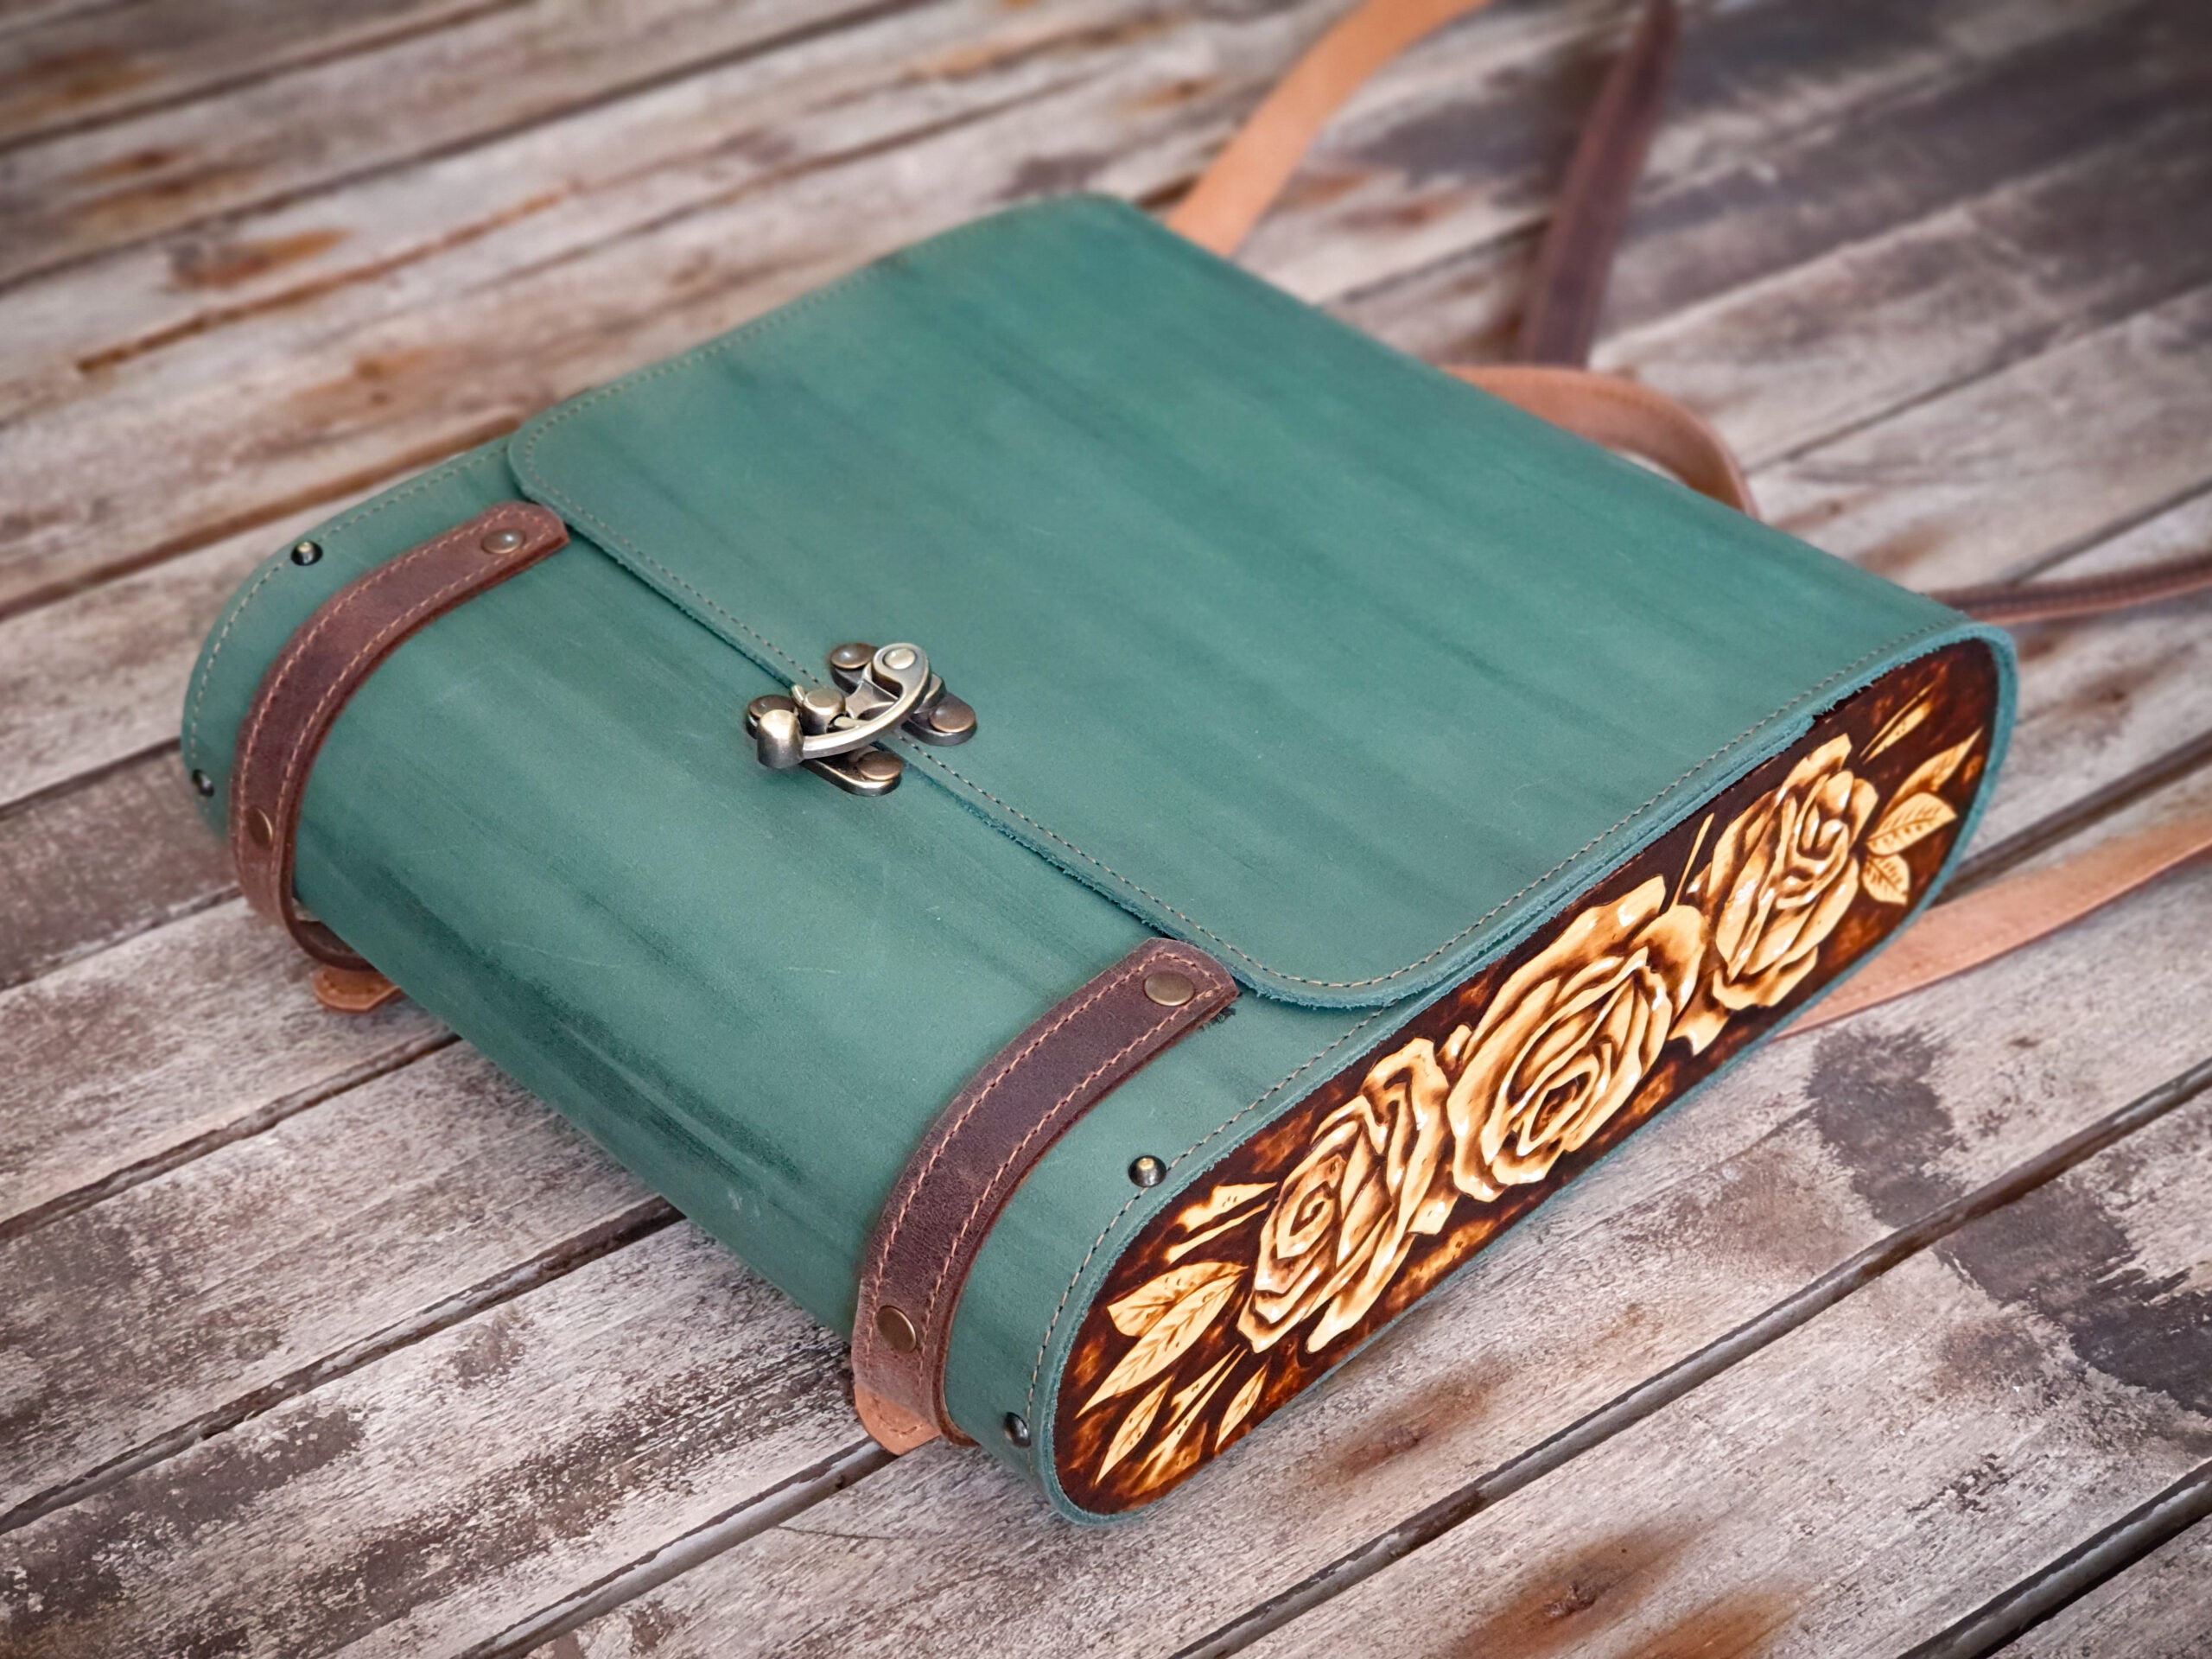 Leather Backpack With Wooden Sides - Eleanaworkshop